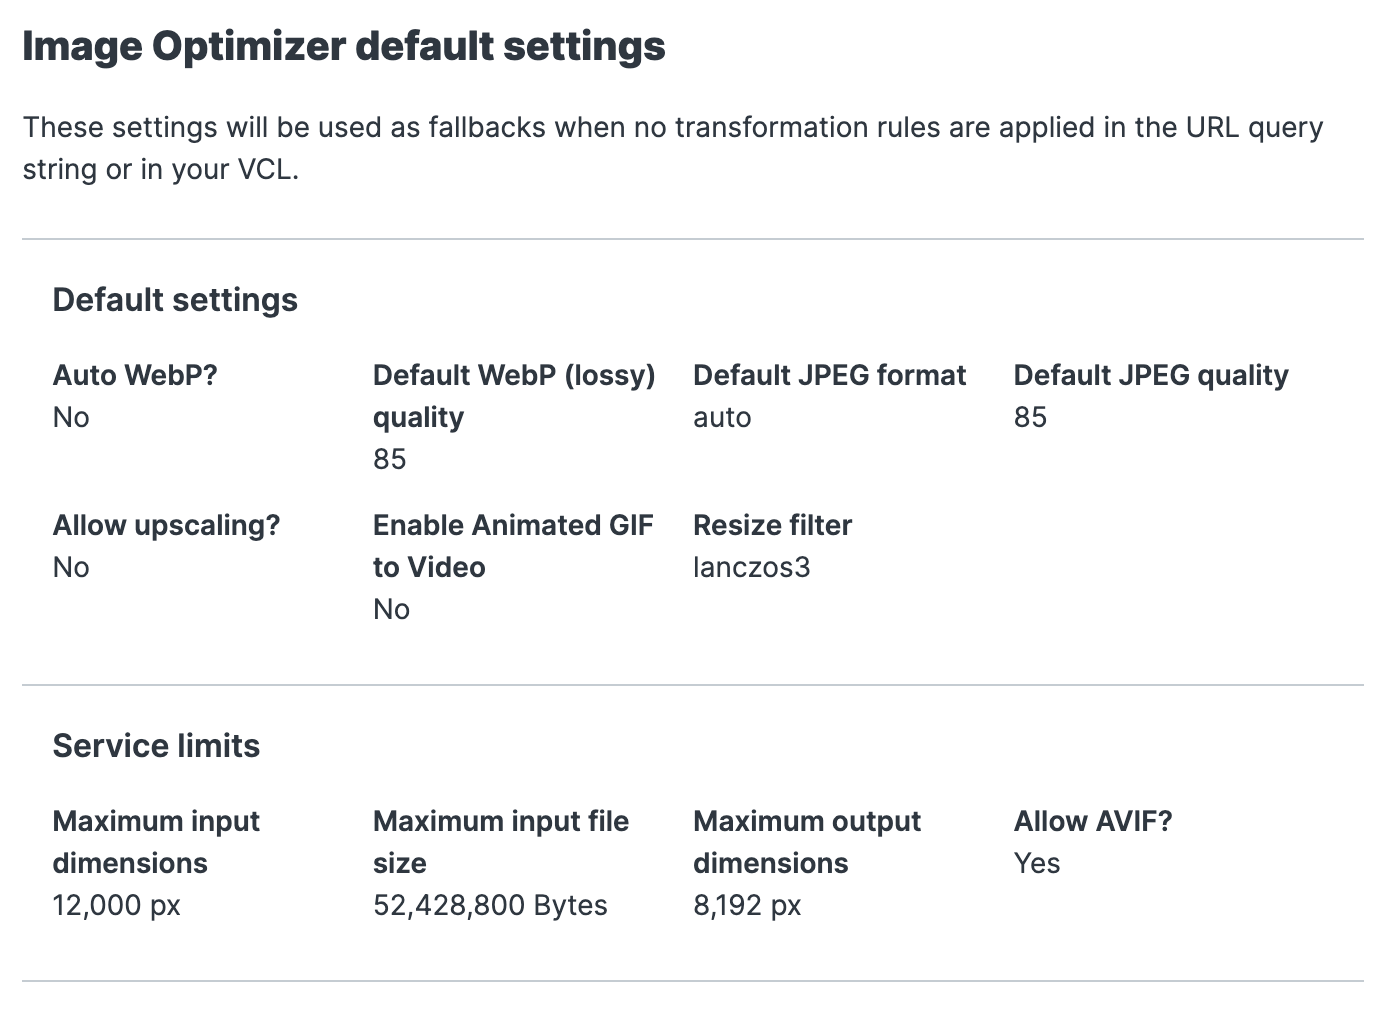 The default Fastly IO settings